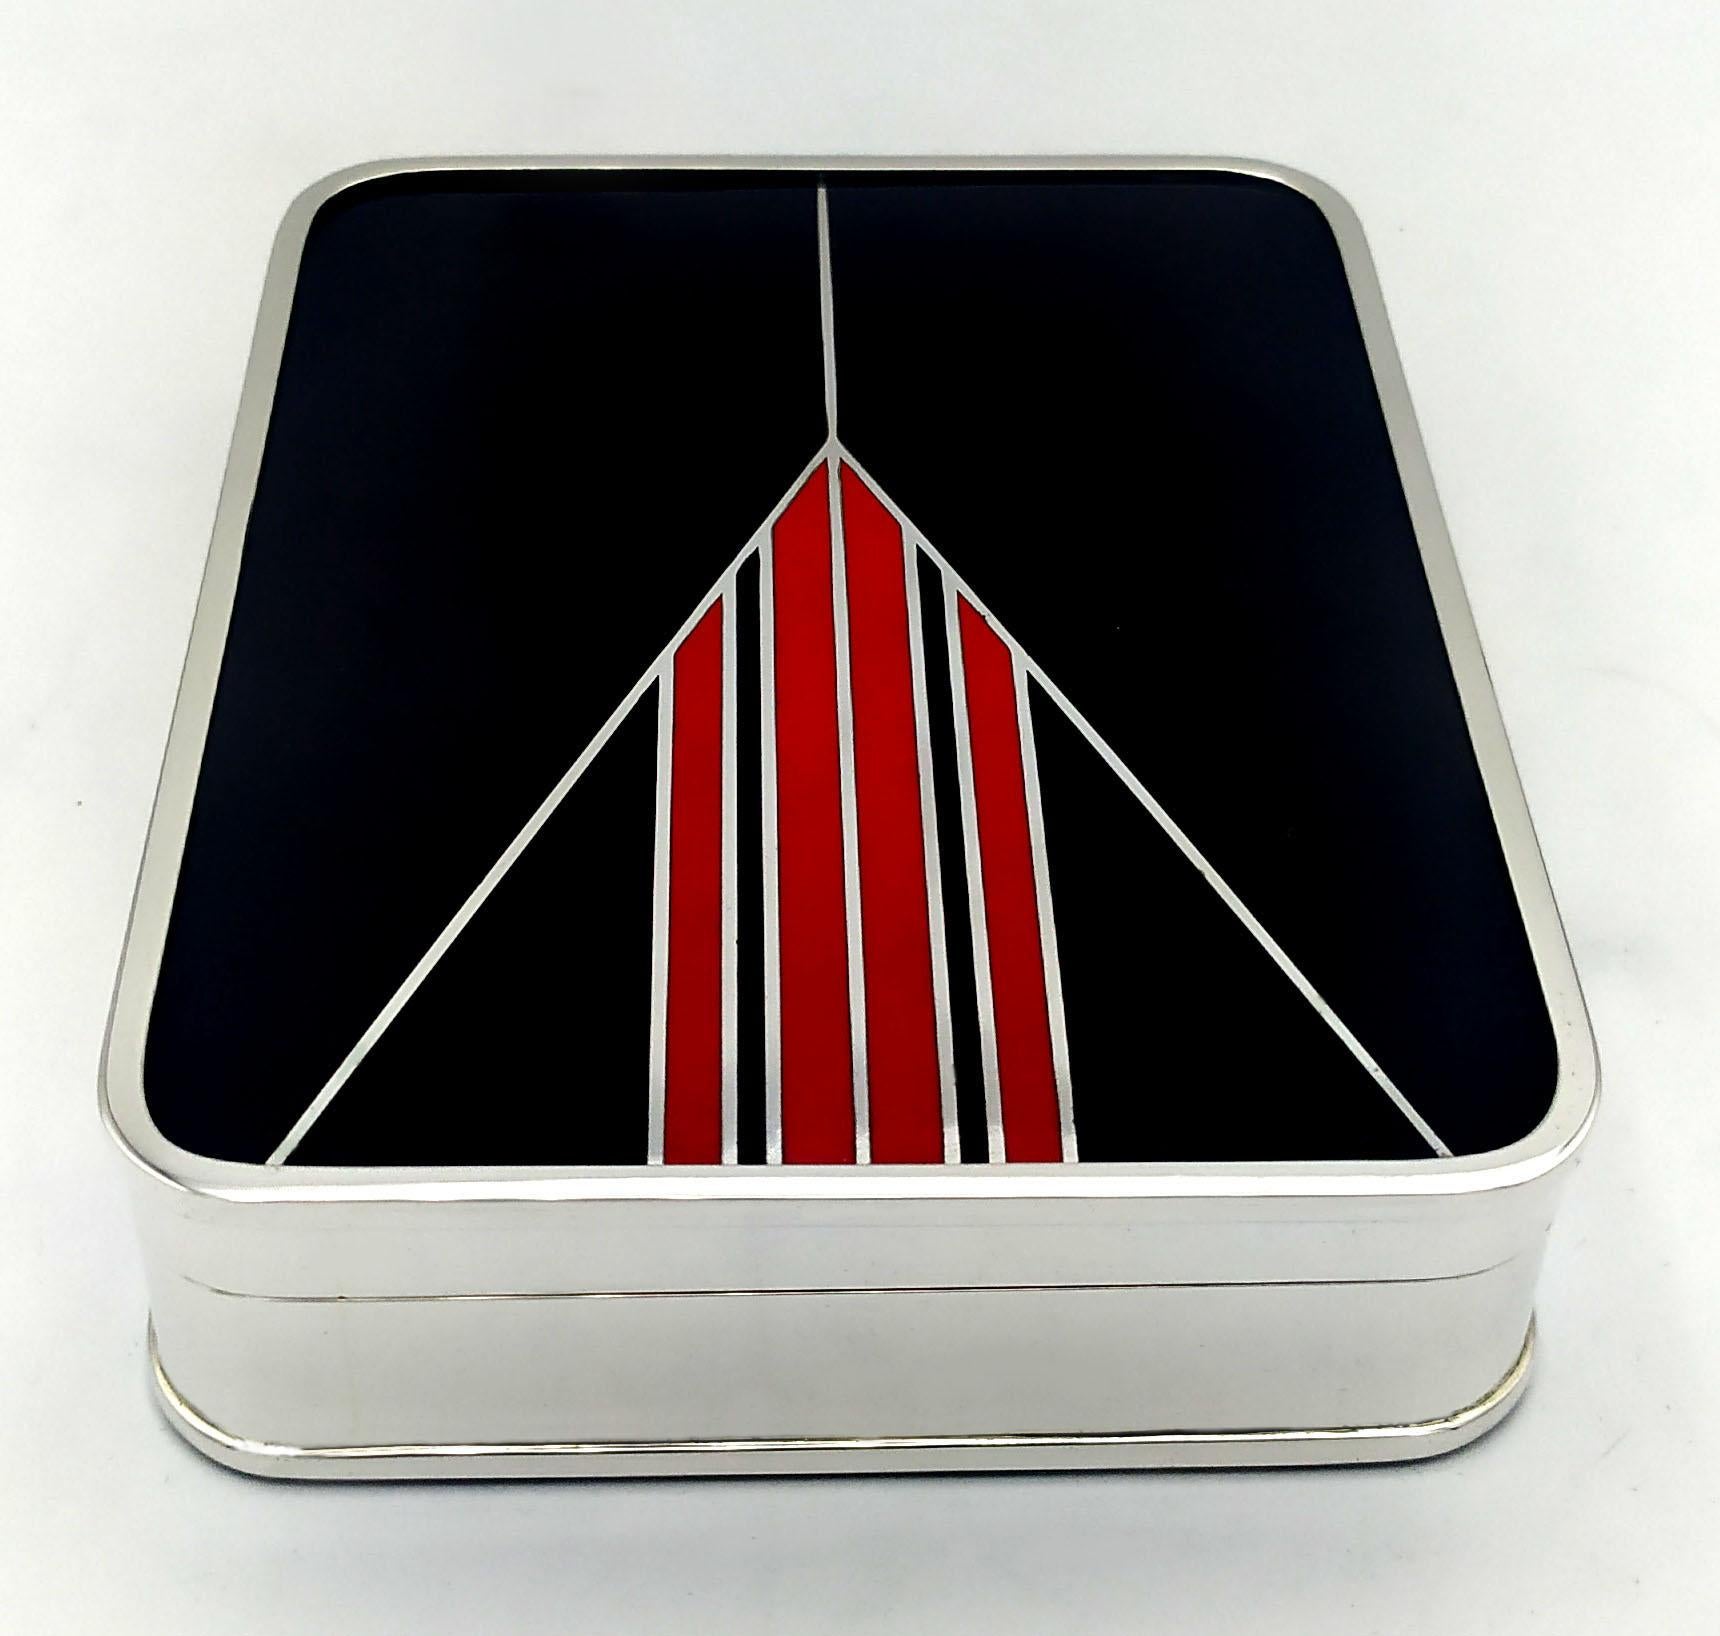 Rectangular table box with rounded corners in 925/1000 sterling silver with fire-enamelled Art Deco design. Dimensions cm. 10.4 x 13.4 x 3.2. Weight gr. 530. Designed by Giorgio Salimbeni in 1976 inspired by objects designed by Louis Cartier around